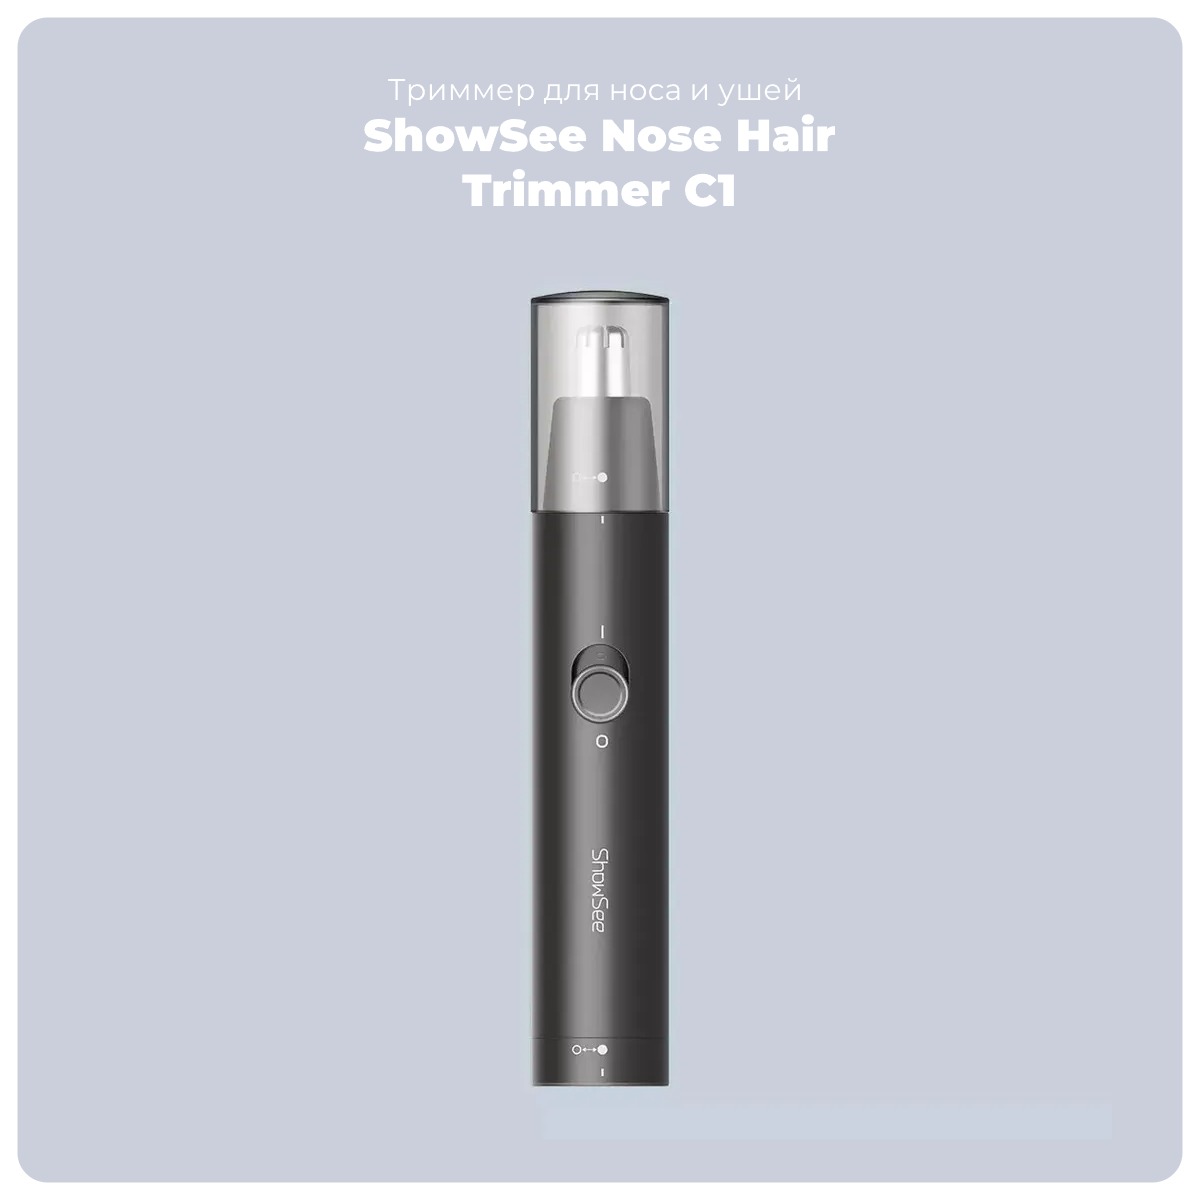 ShowSee-Nose-Hair-Trimmer-C1-GY-01